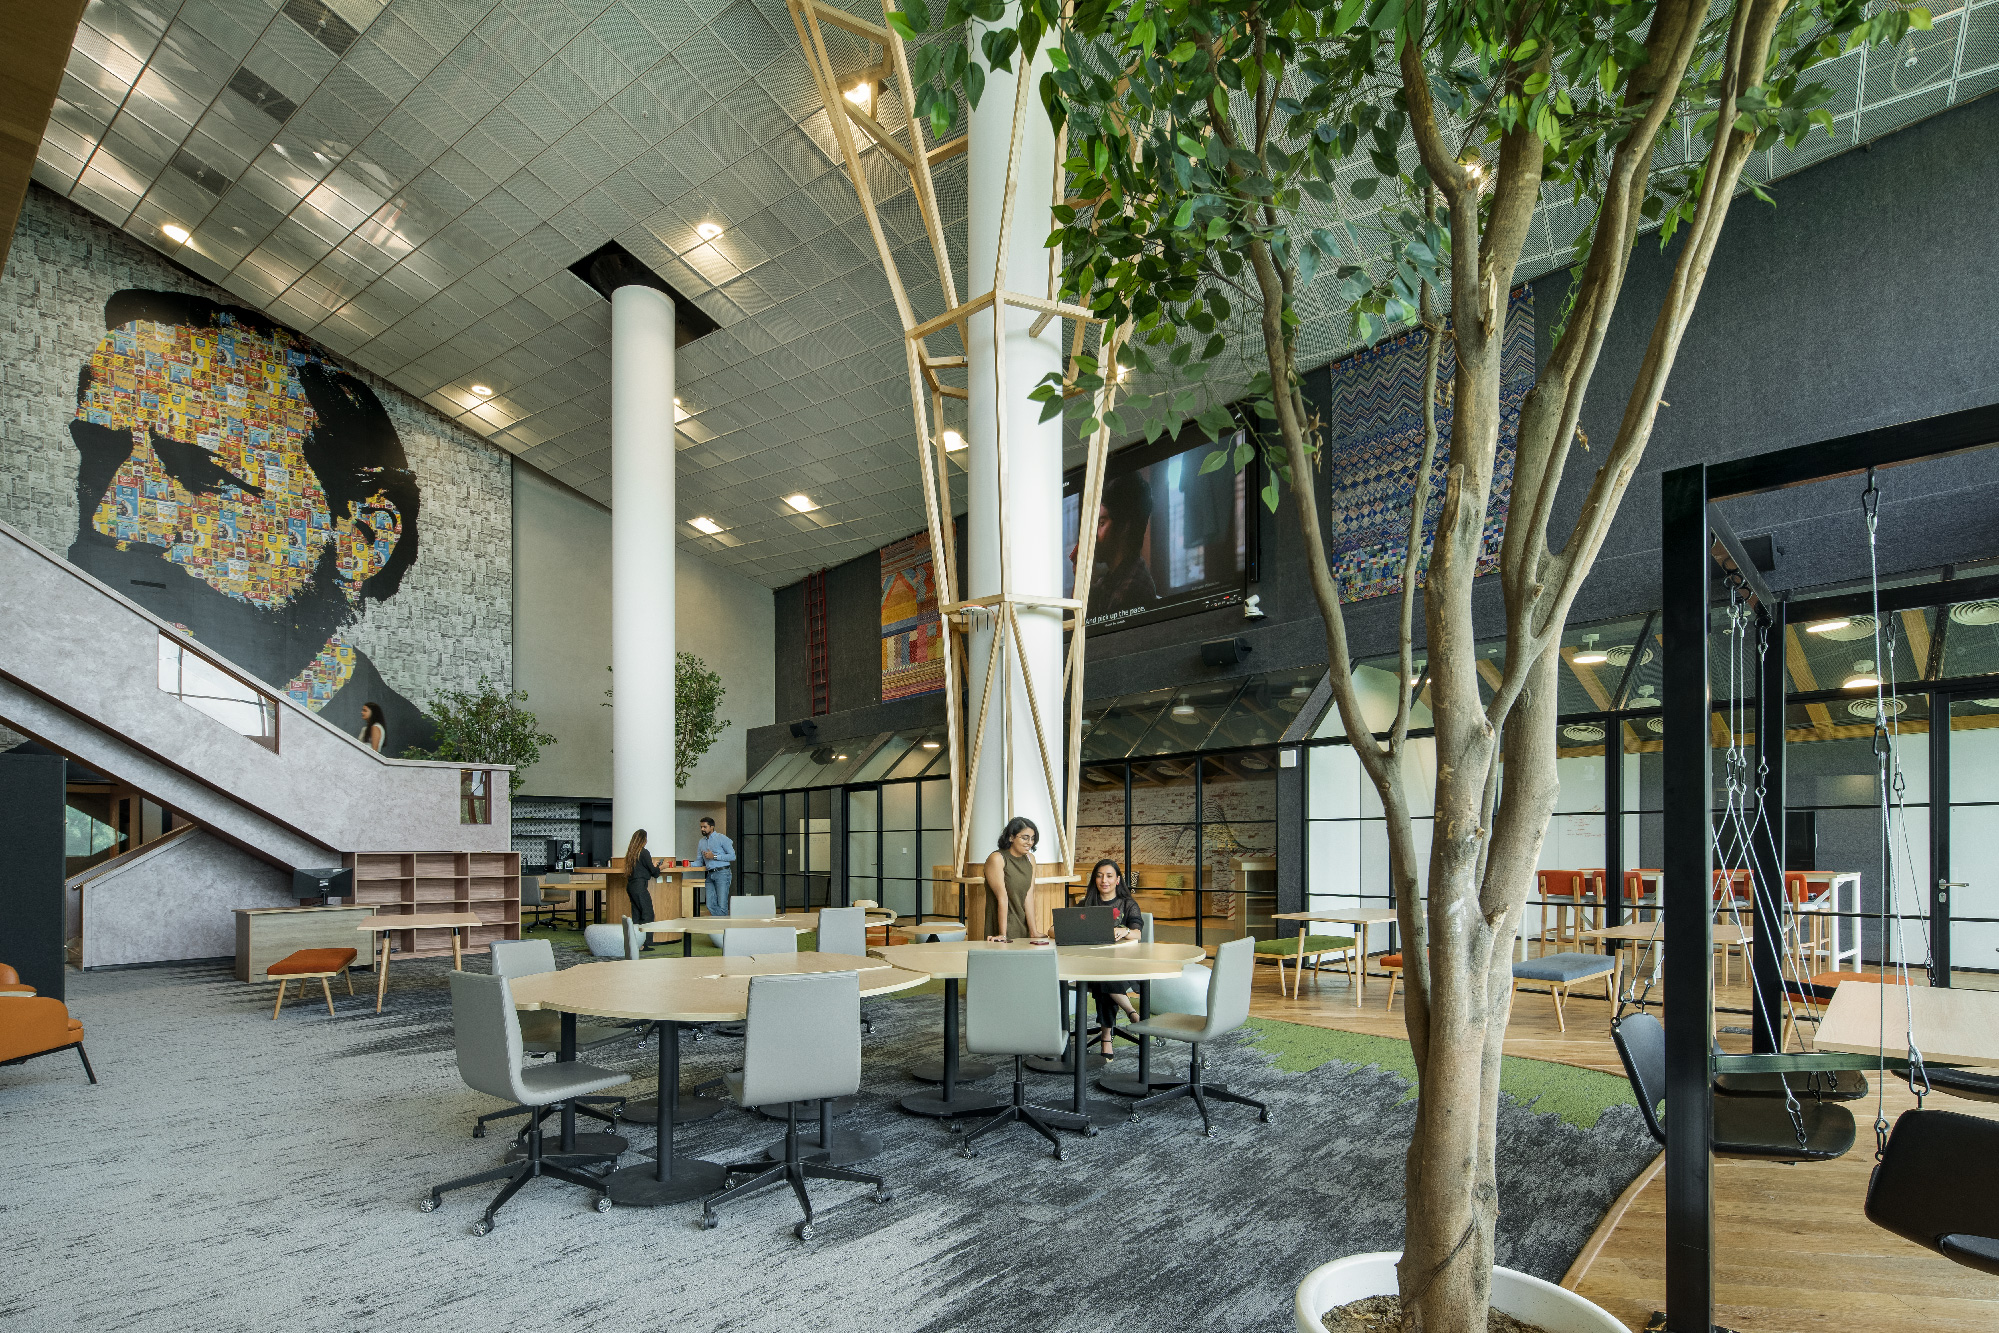 benefits of workplace design with natural elements and ample sunlight.